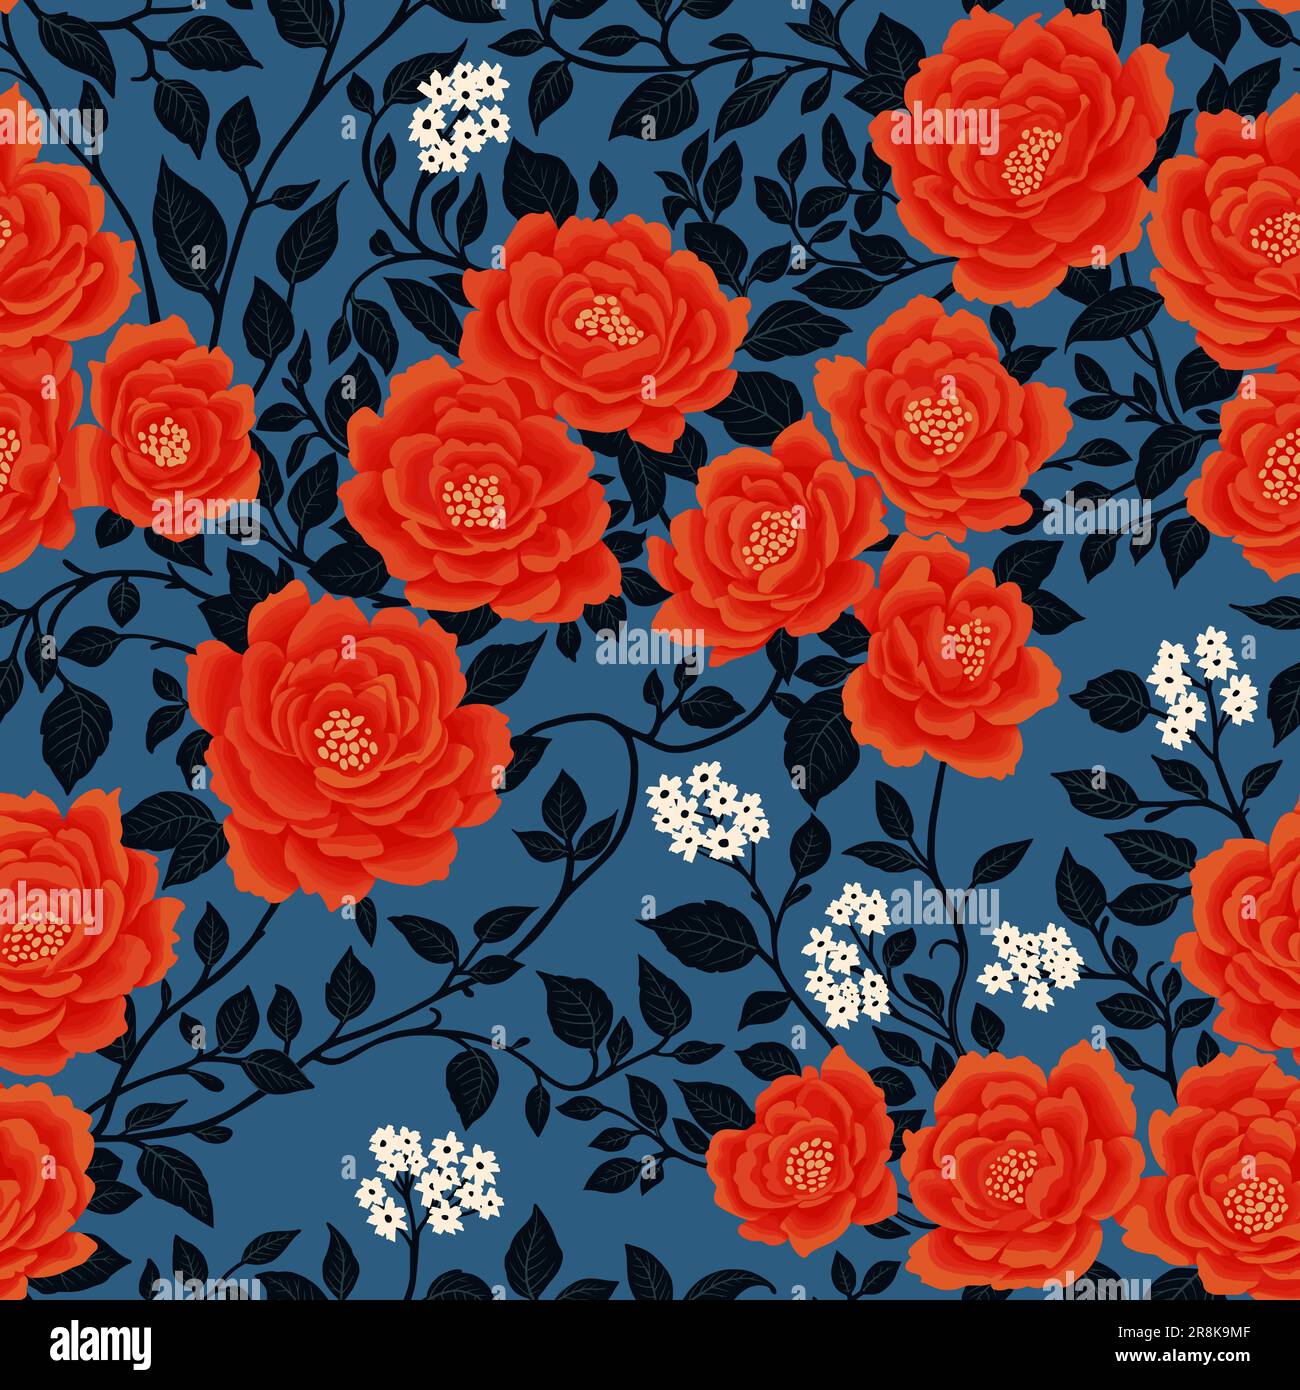 Floral Seamless Pattern of Red and White Flowers and Black Leaves on Blue in a Chinoiserie style. Hand Drawn Art. Wallpaper Design for Textiles, Papers, Prints, Fashion, Background, Beauty Products. Stock Vector